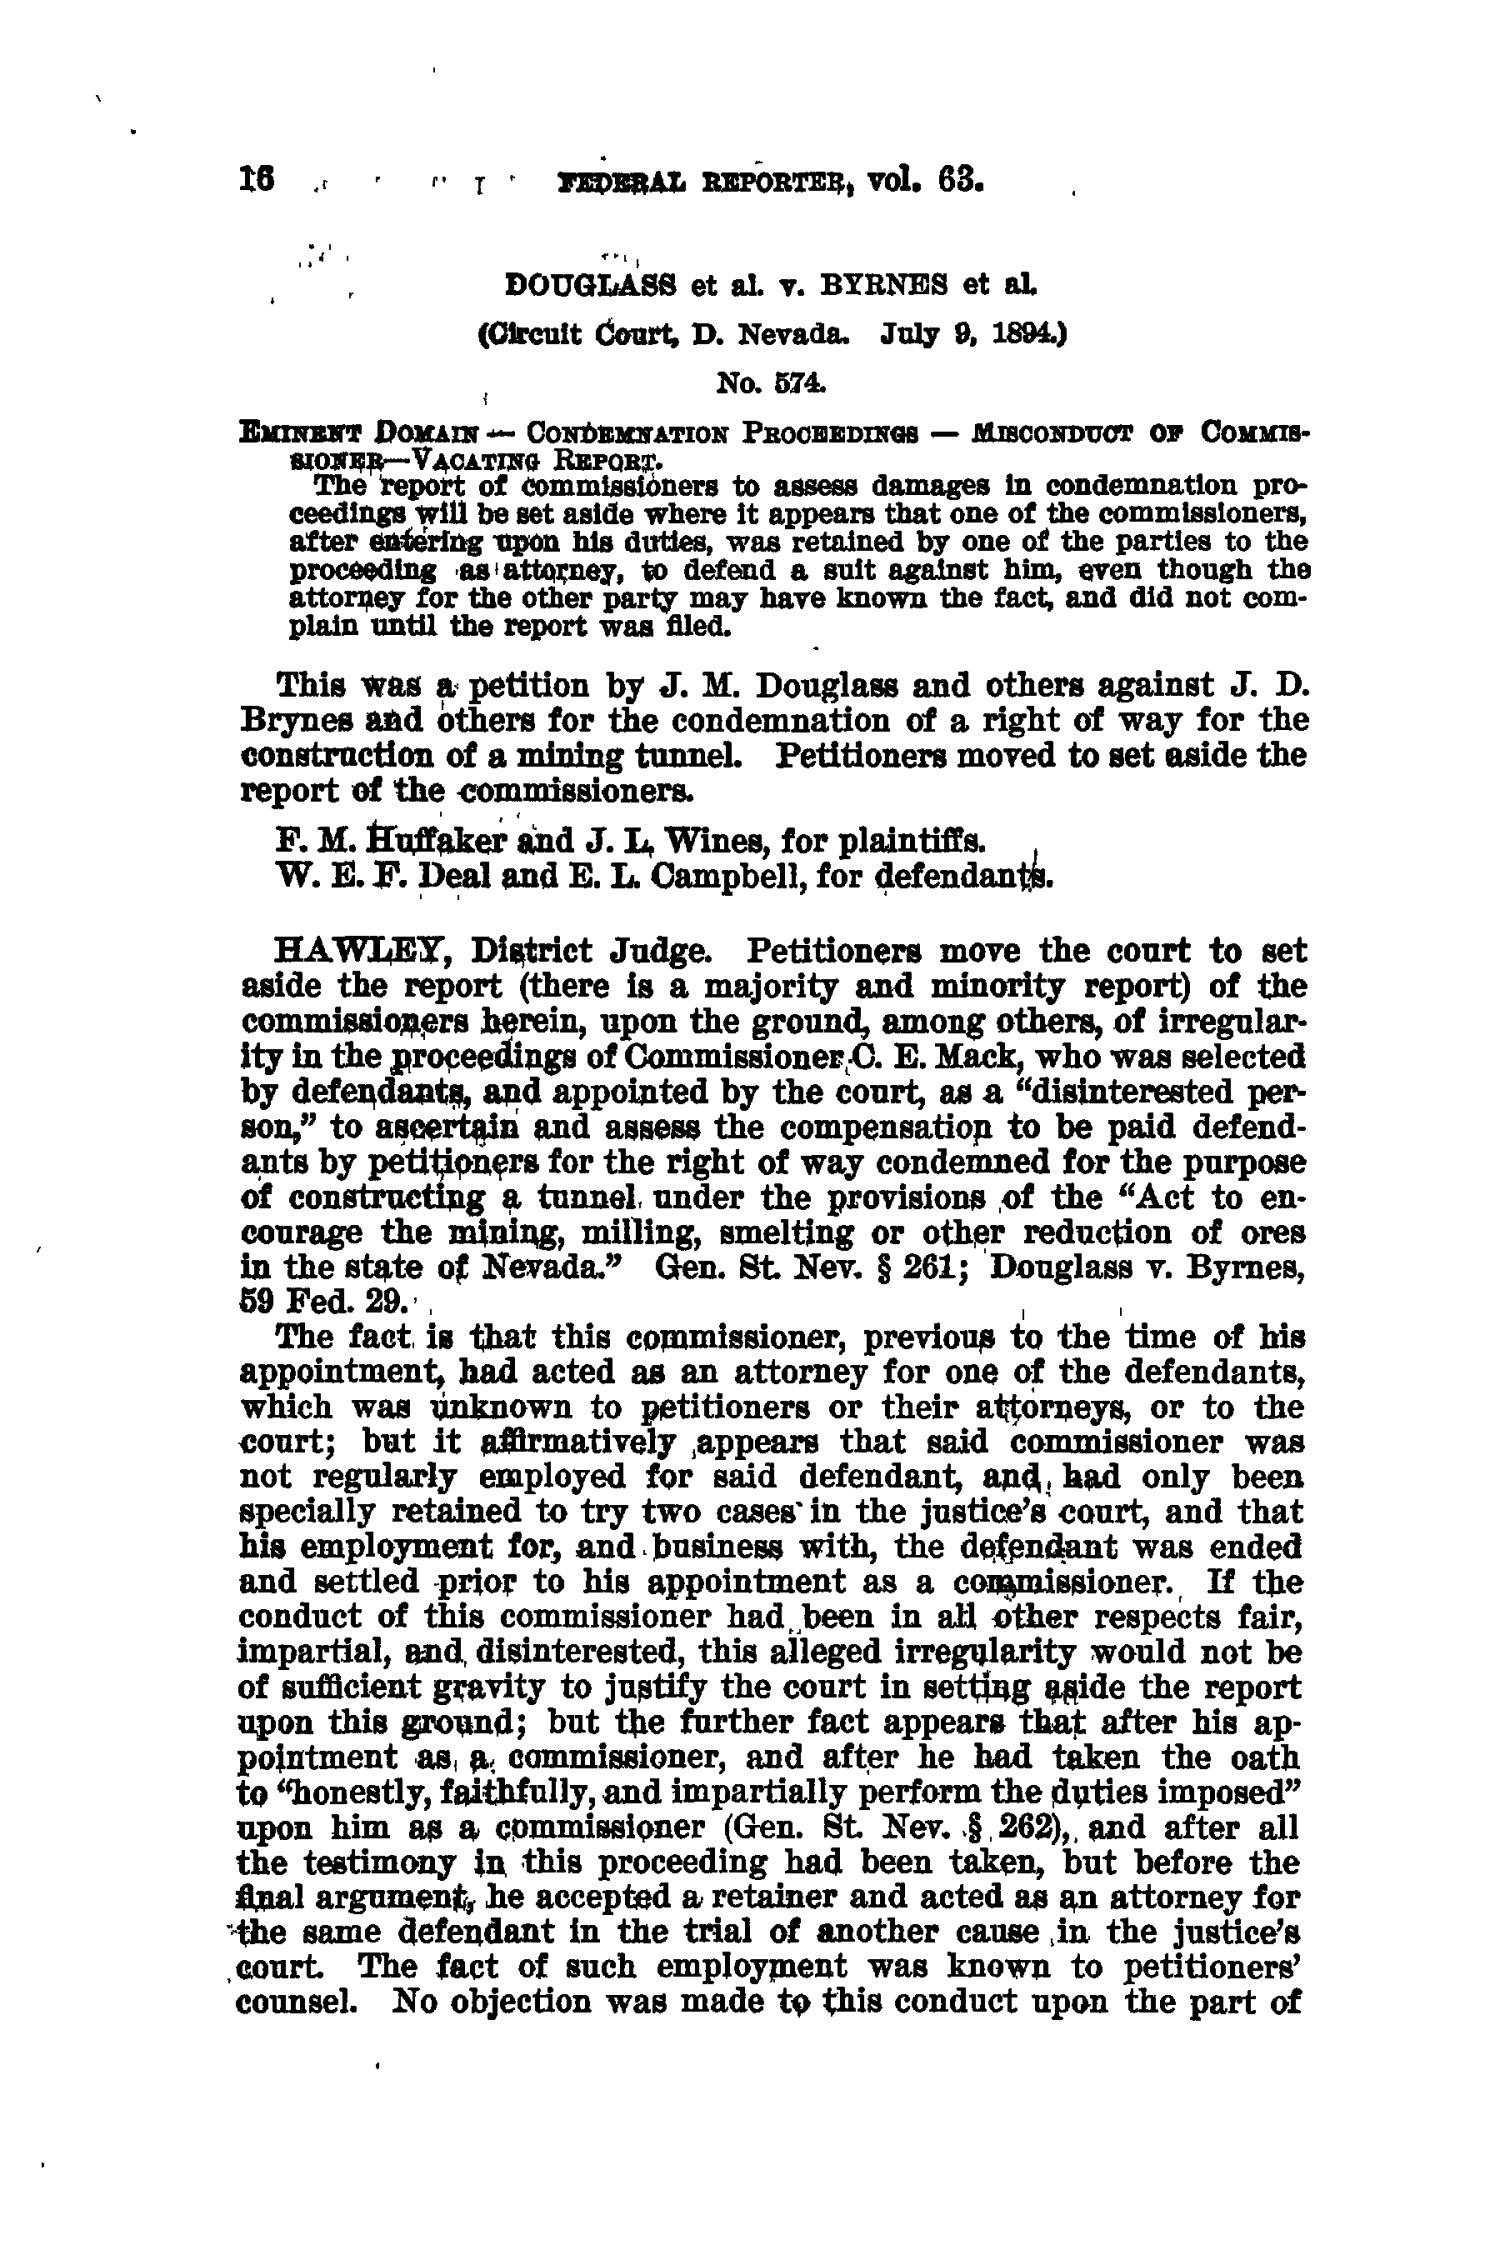 The Federal Reporter. Volume 63 Cases Argued and Determined in the Circuit Courts of Appeals and Circuit and District Courts of the United States. October-December, 1894.
                                                
                                                    16
                                                